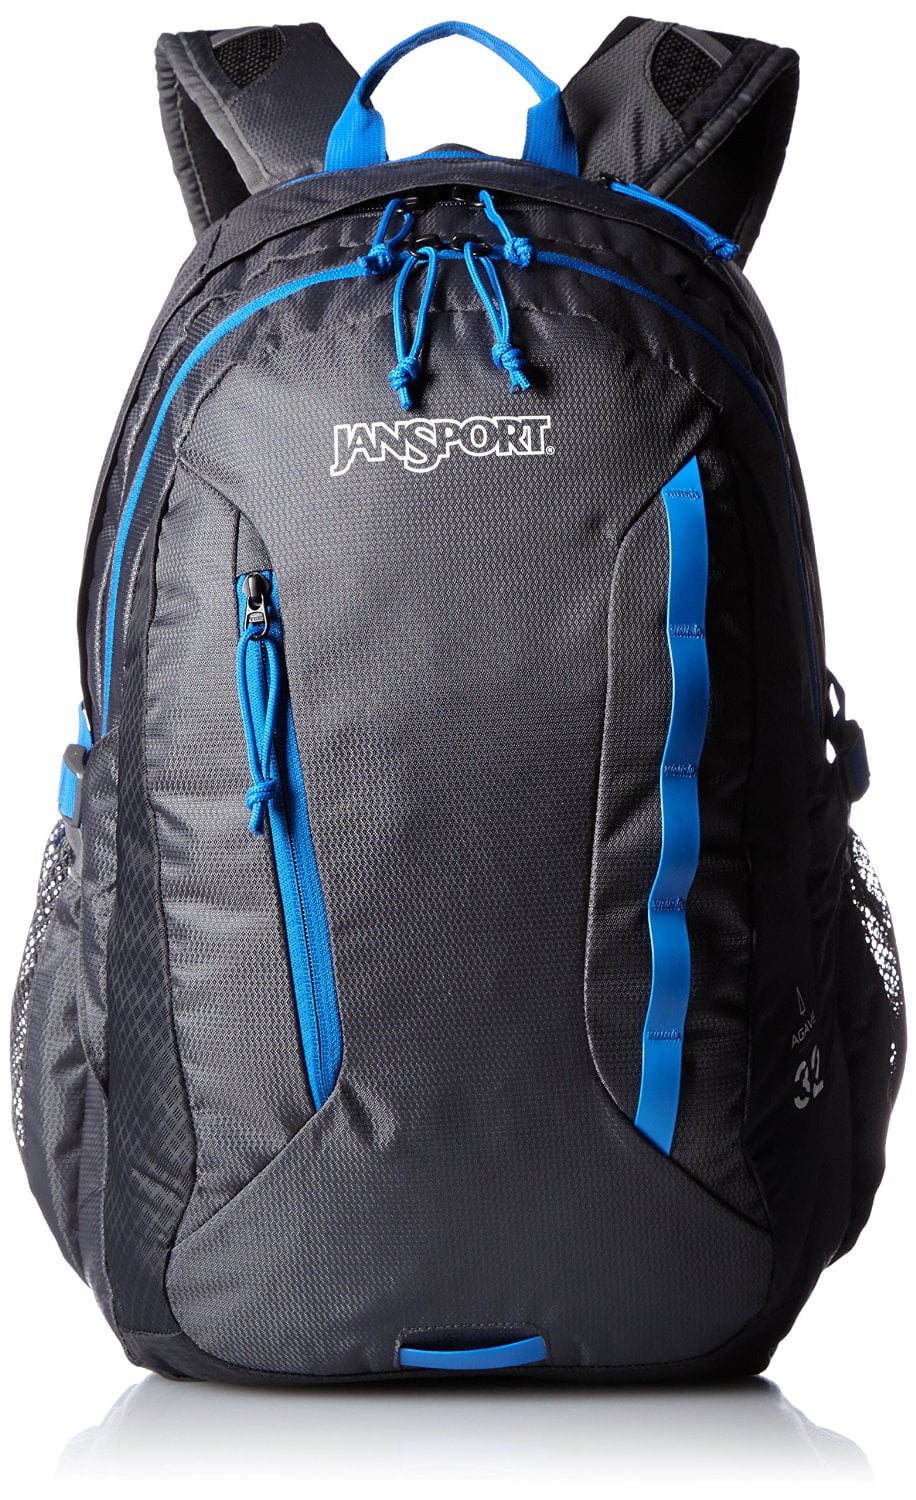 Jansport Agave daypack 32L Laptop Hydration Backpack-Forge Grey - www.waterandnature.org